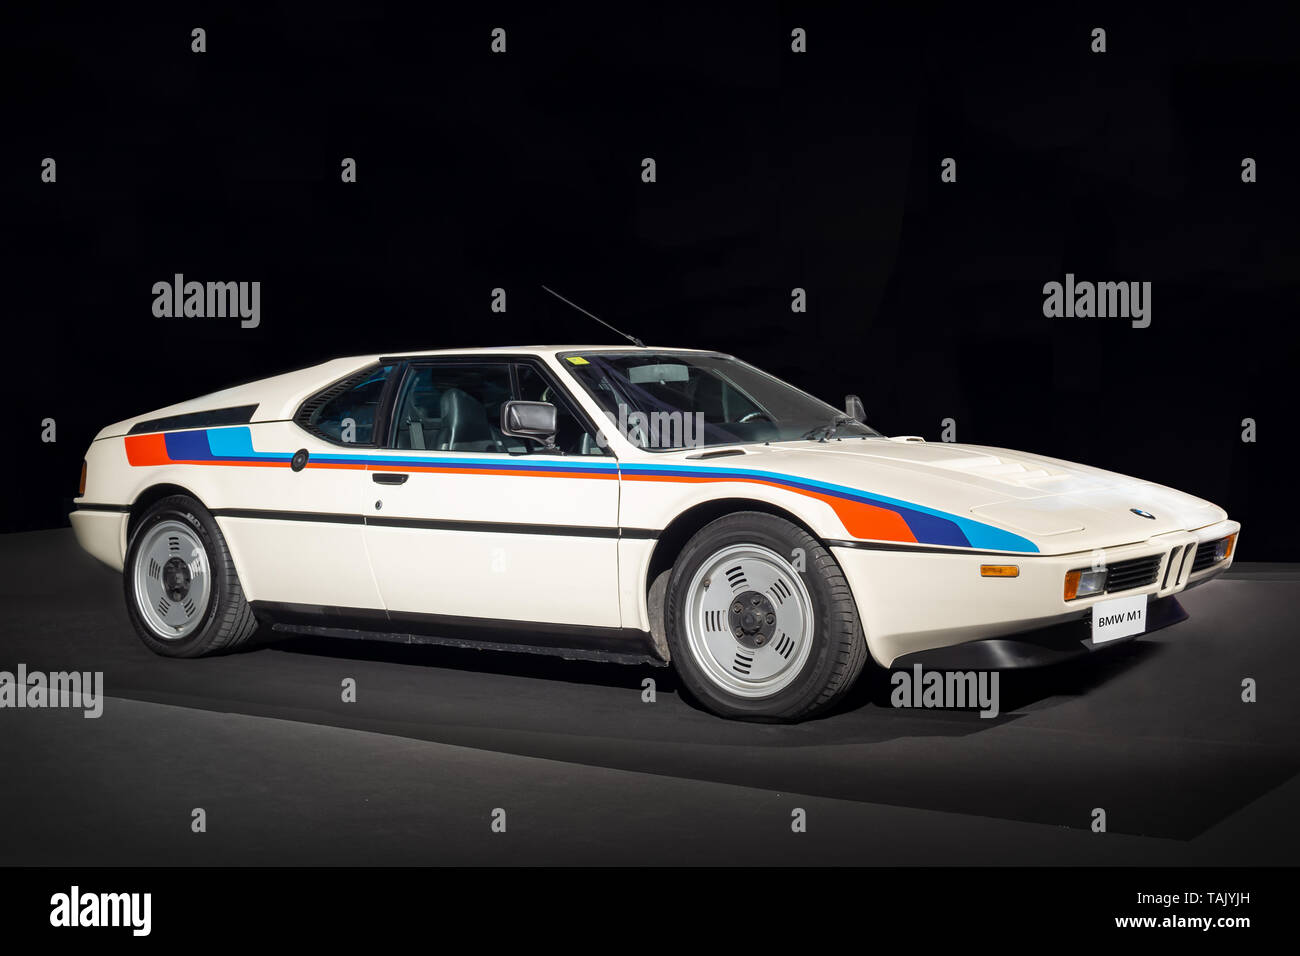 BARCELONA, SPAIN-MAY 11, 2019: 1979 BMW M1 (E26) at the 100 years of the Automobile Exhibition Stock Photo